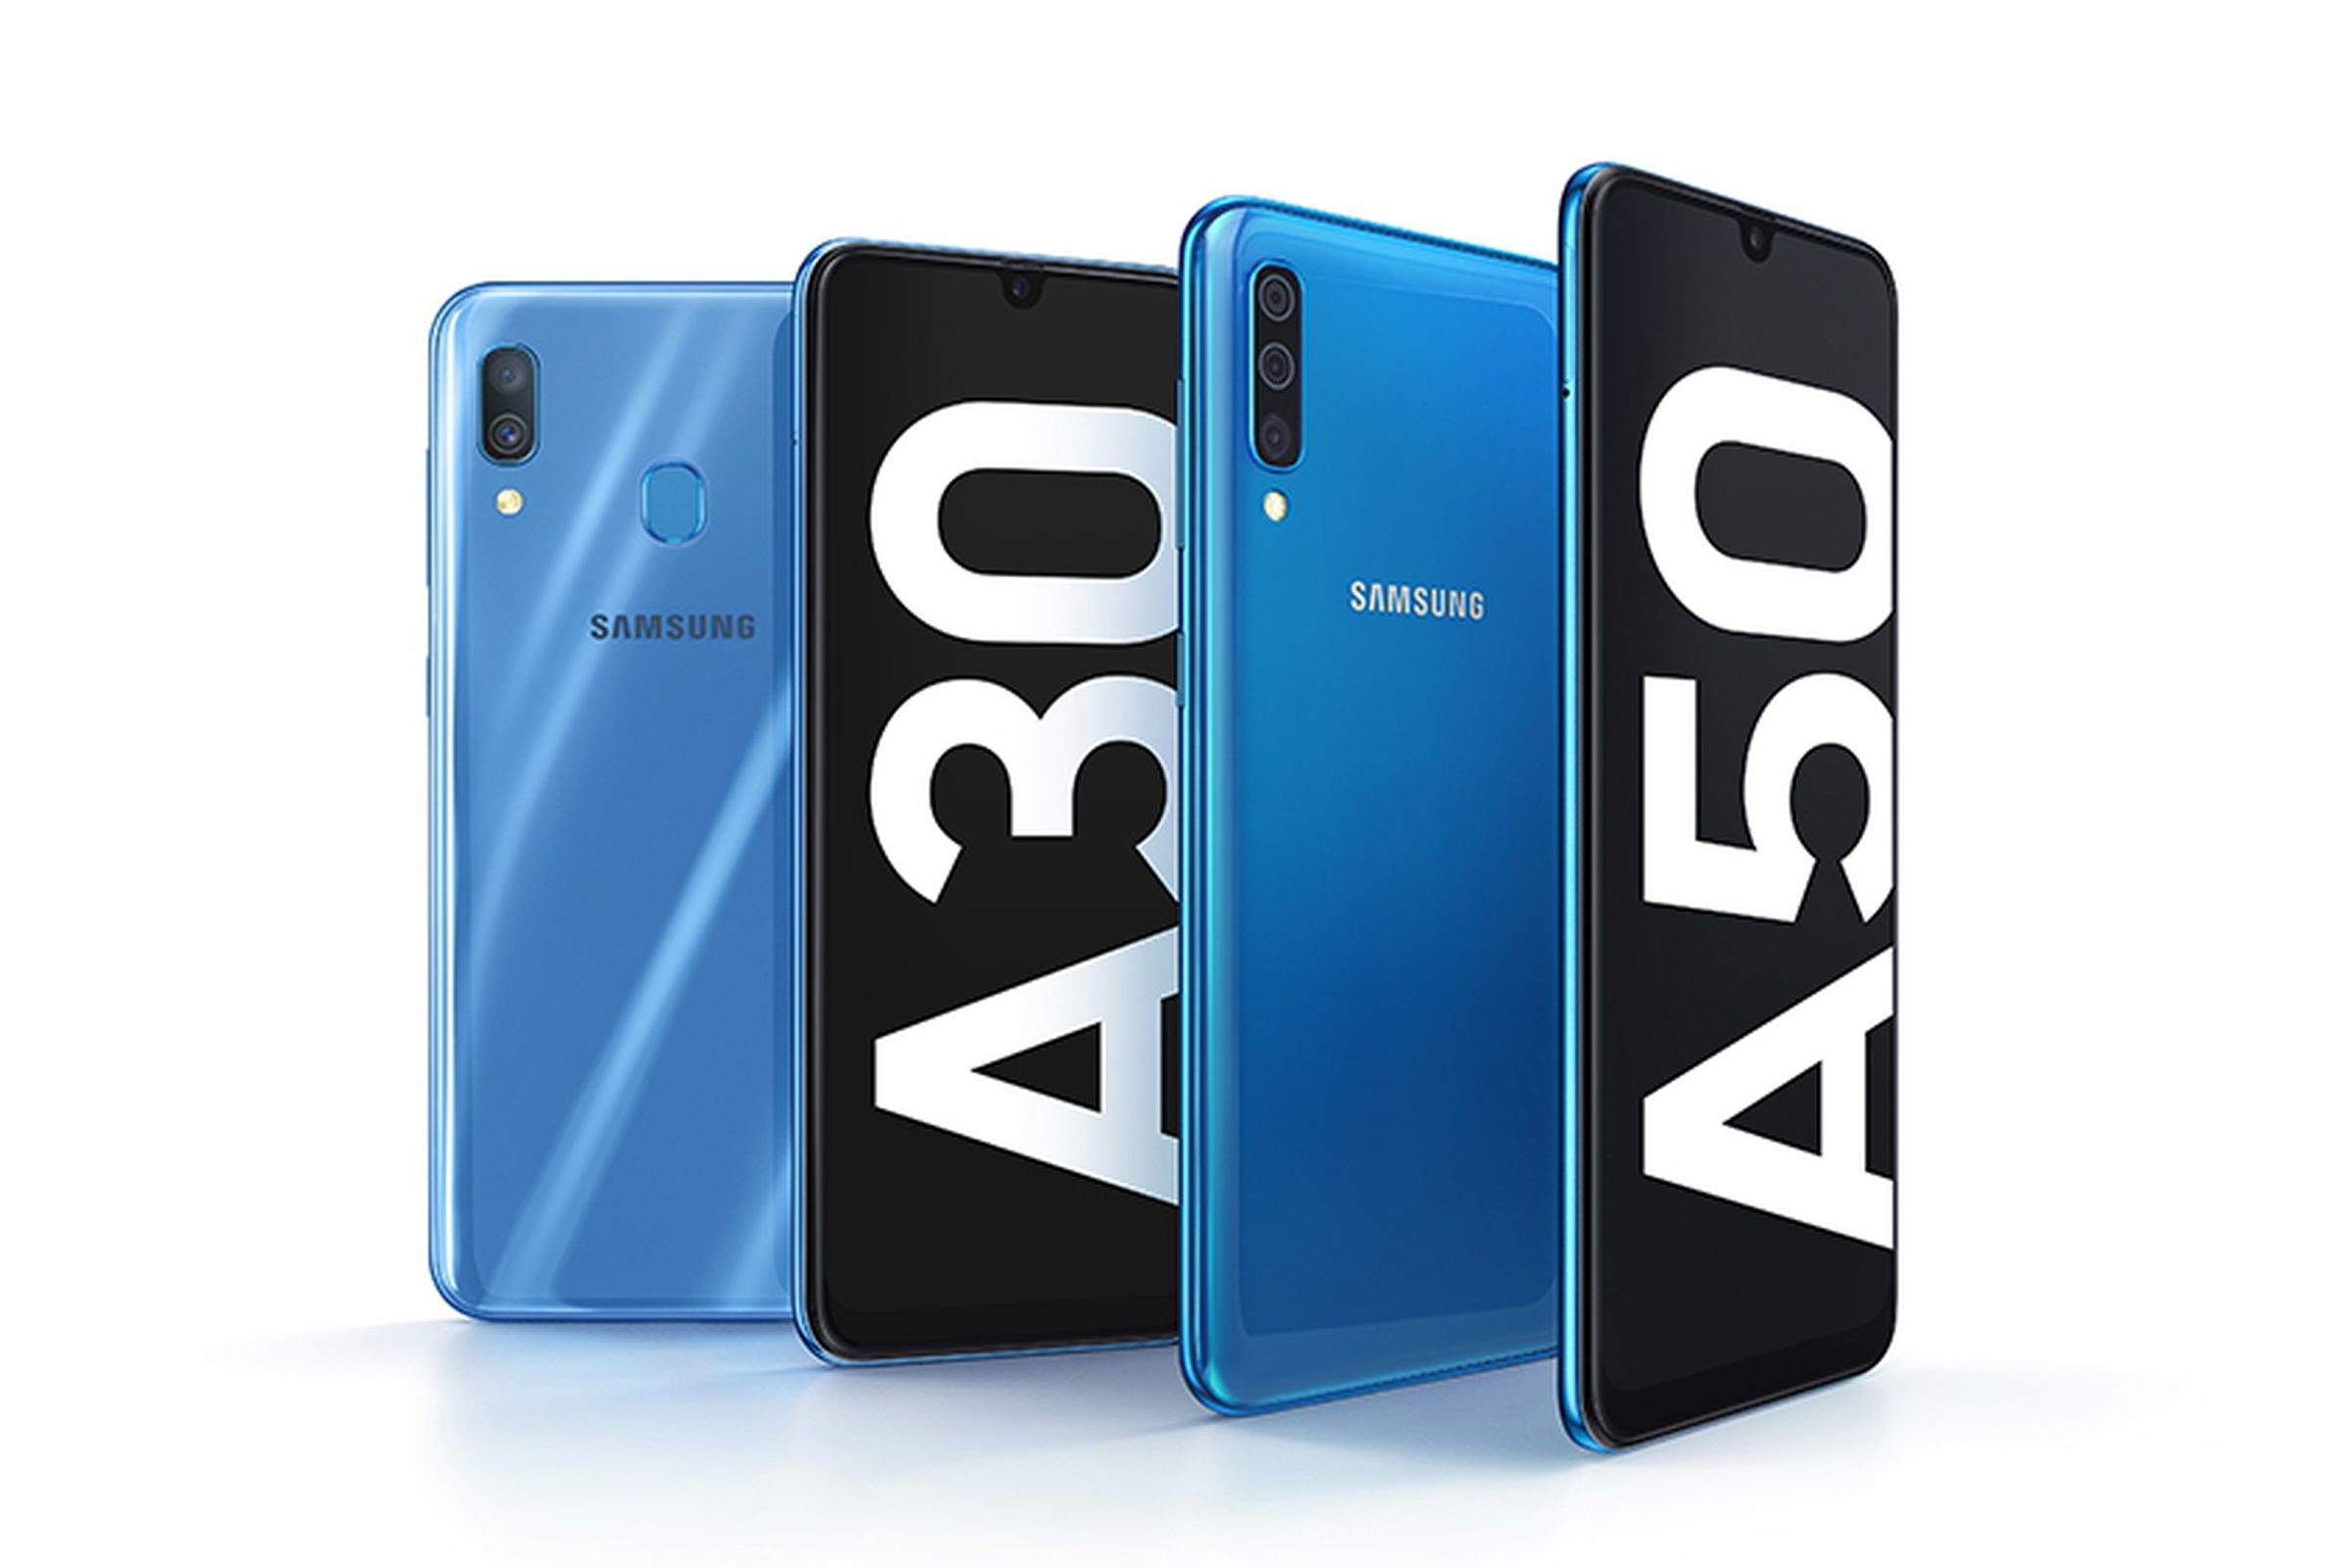 Samsung announced the Galaxy A30 and A50 last month.